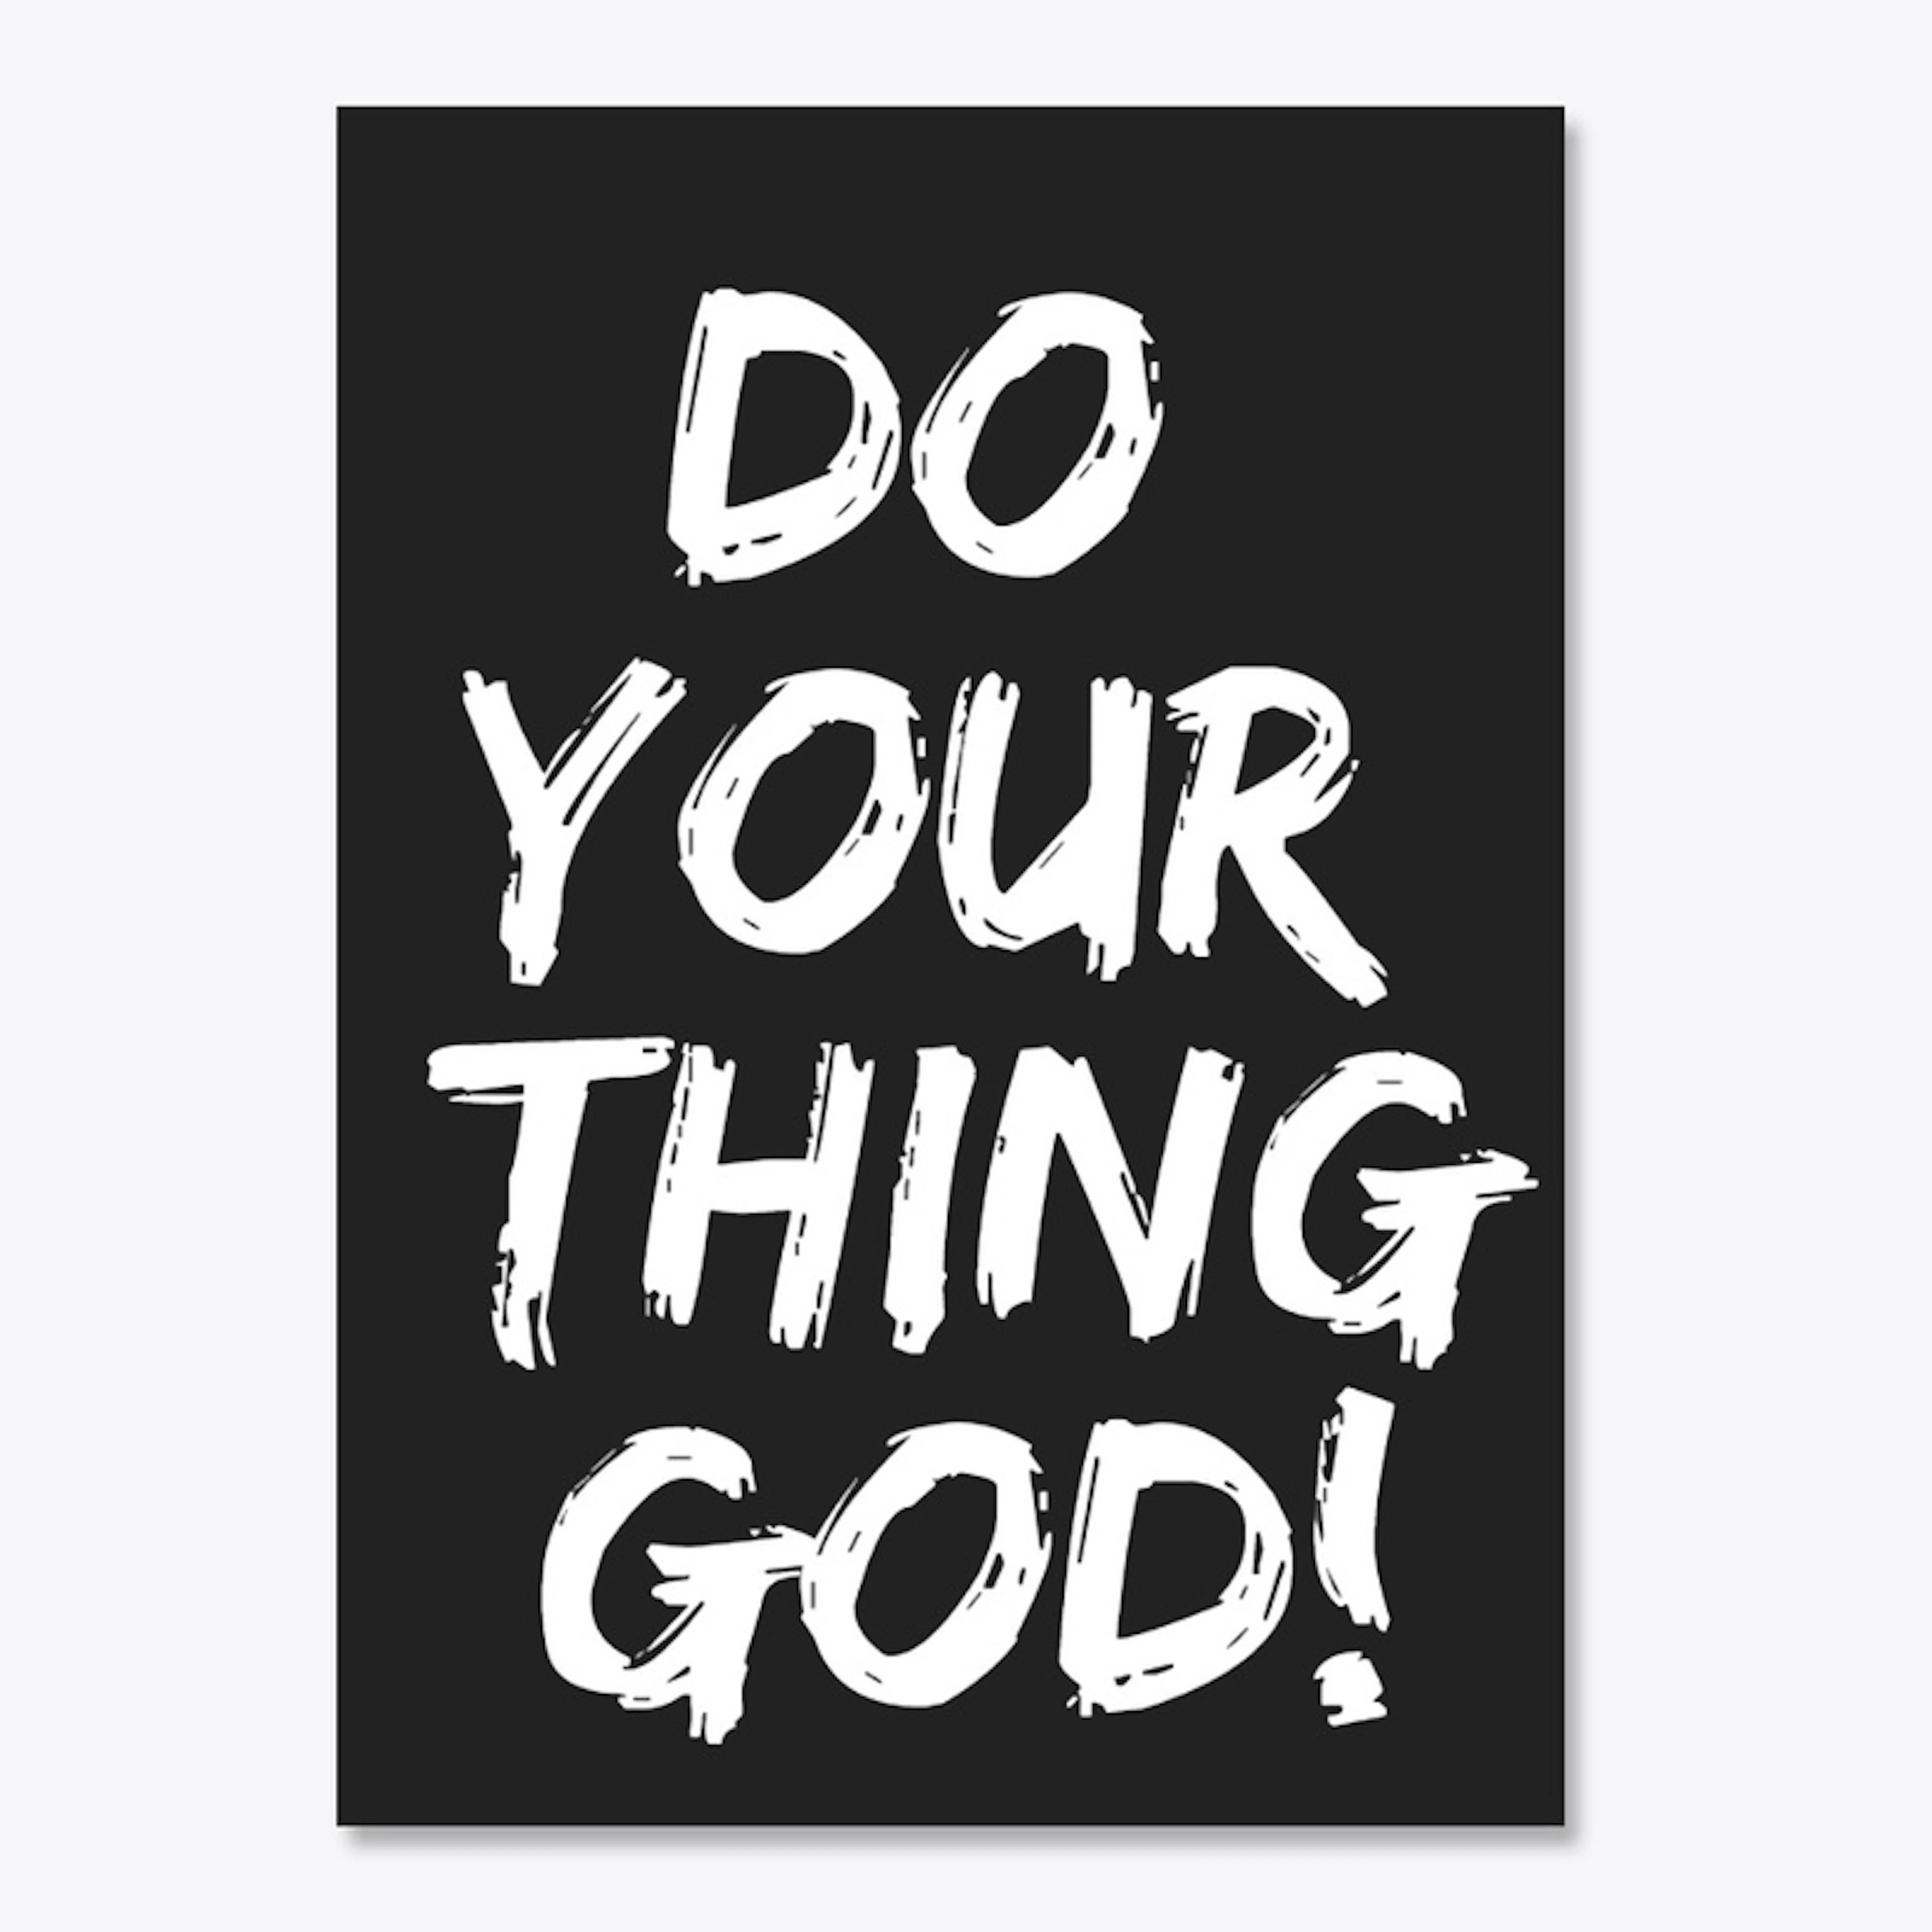 DO YOUR THING GOD!